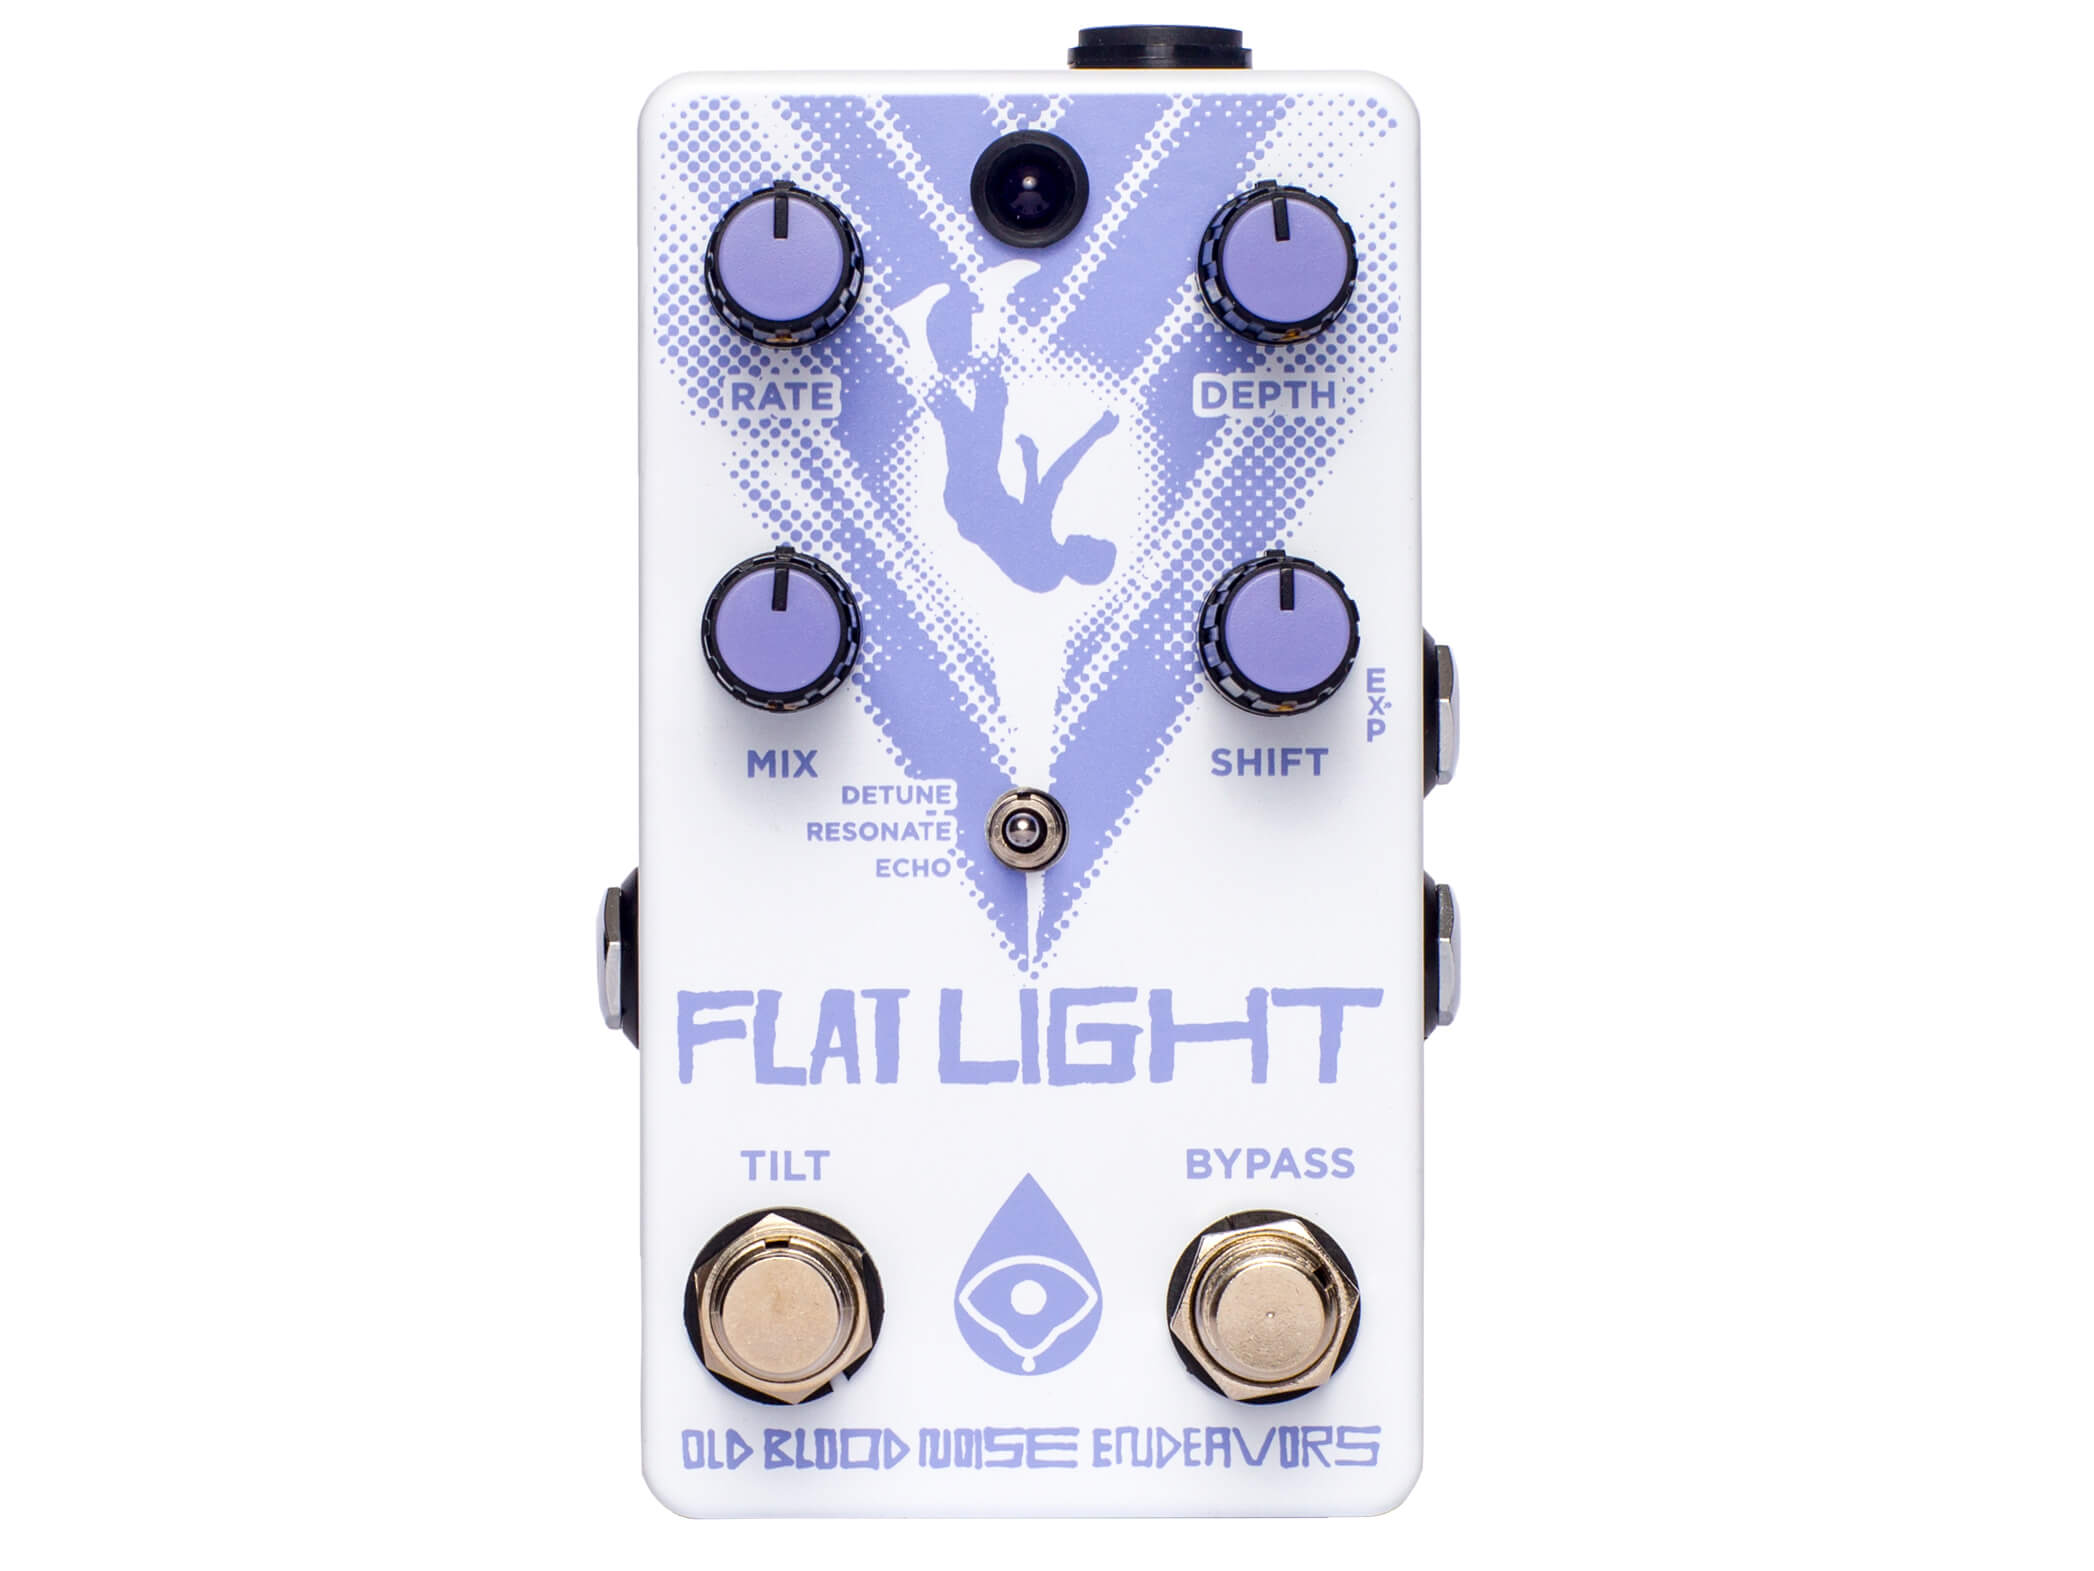 Old Blood Noise Endeavors’ new pedal is a three-fer